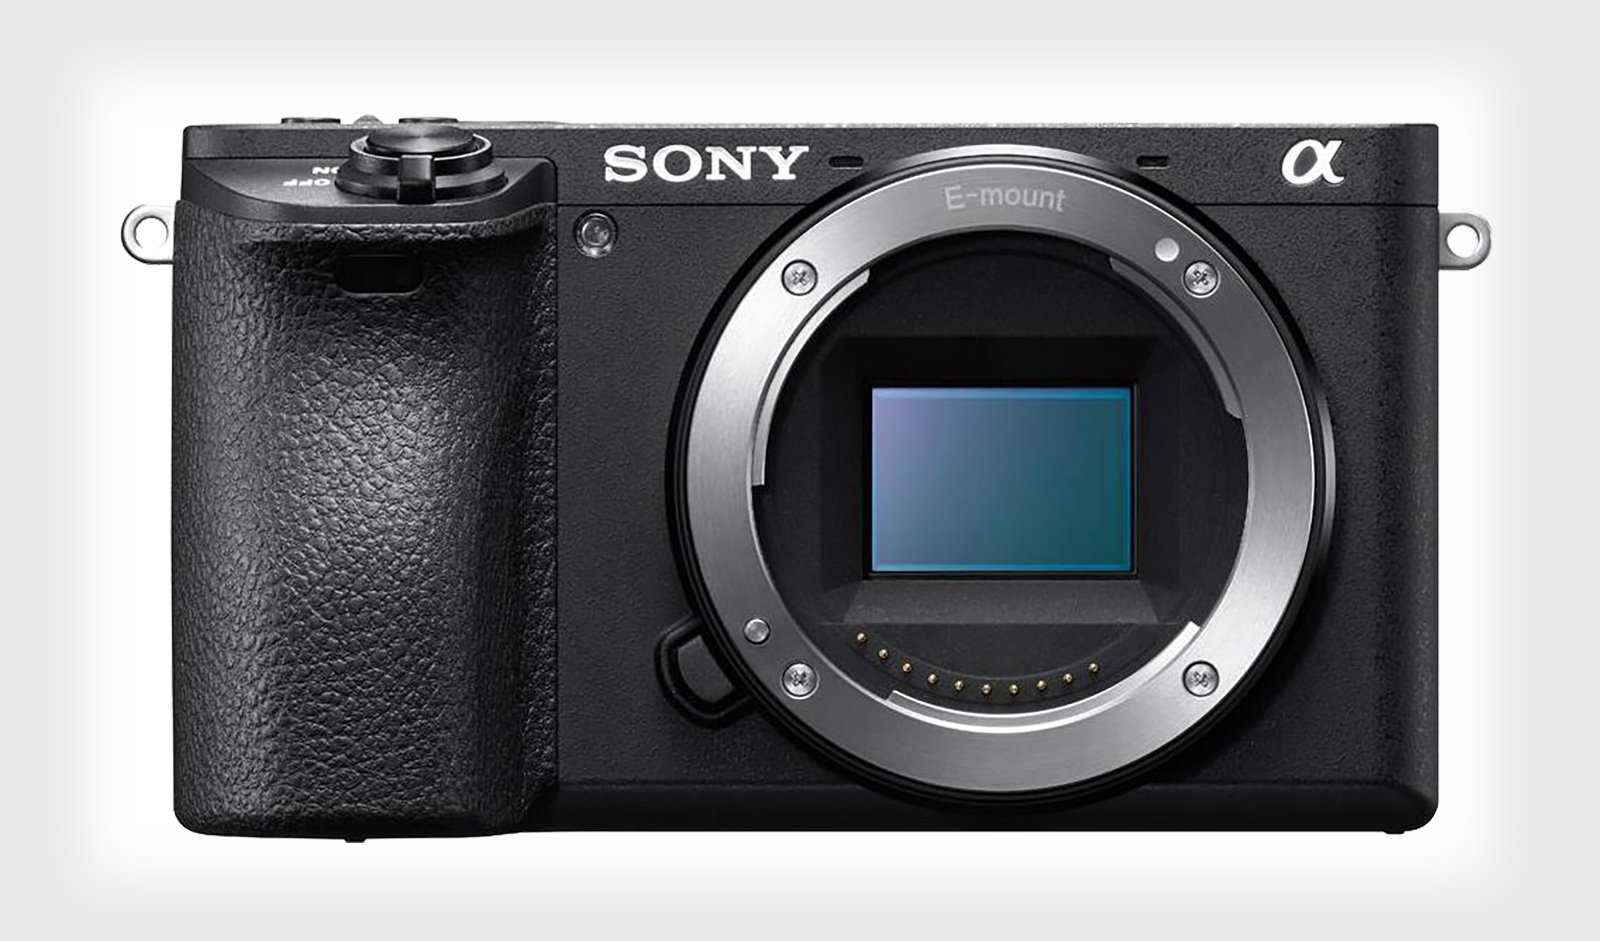 Sony to Launch Two New APS-C E-Mount Cameras this Month: Report